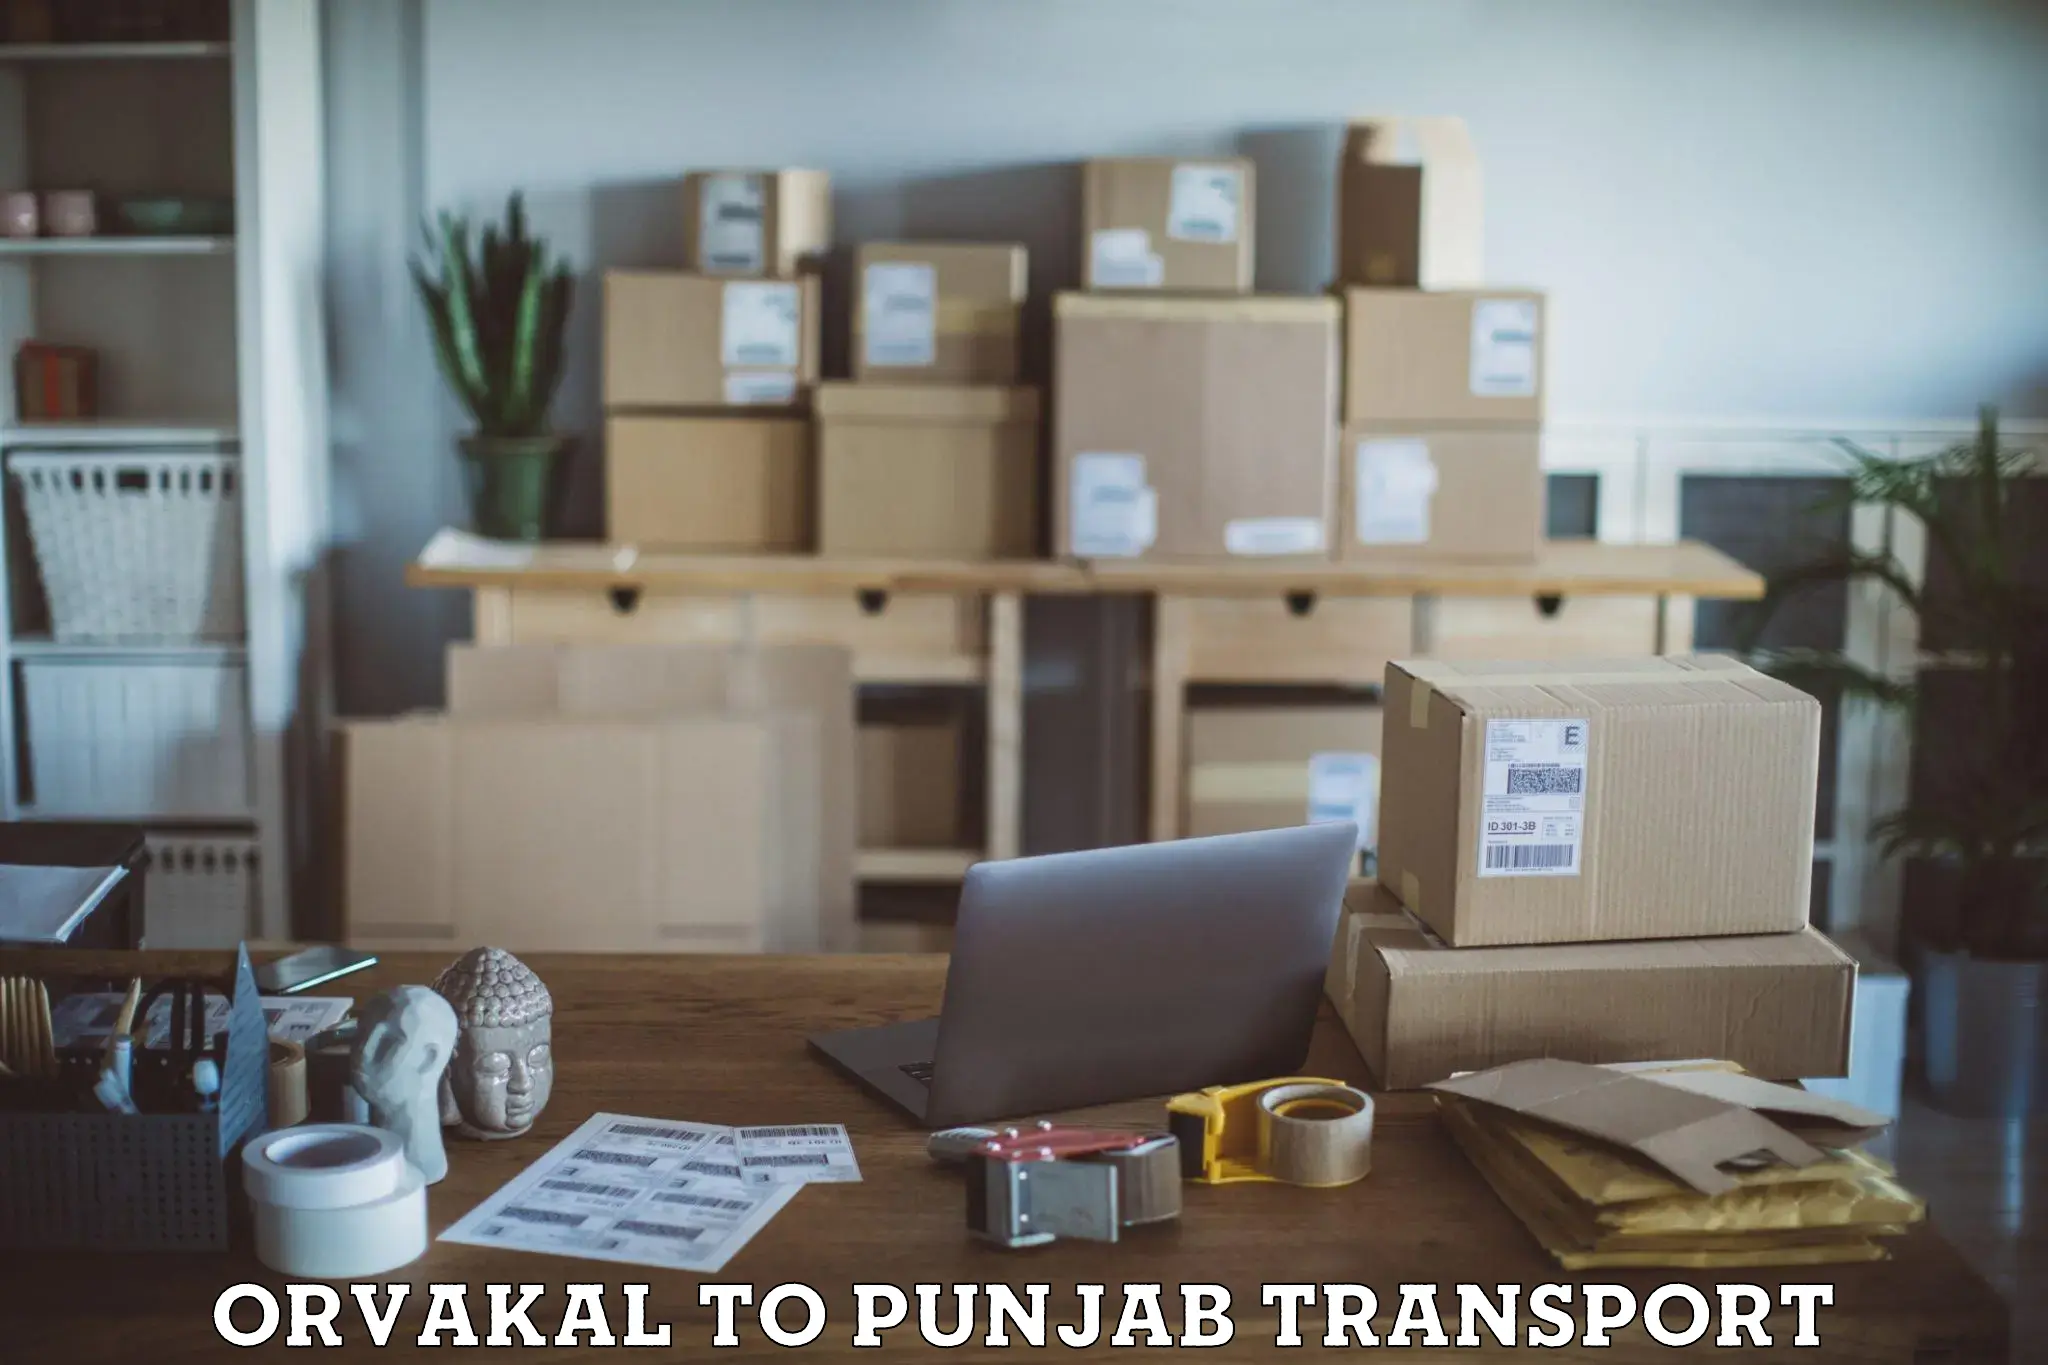 Daily parcel service transport Orvakal to Sultanpur Lodhi